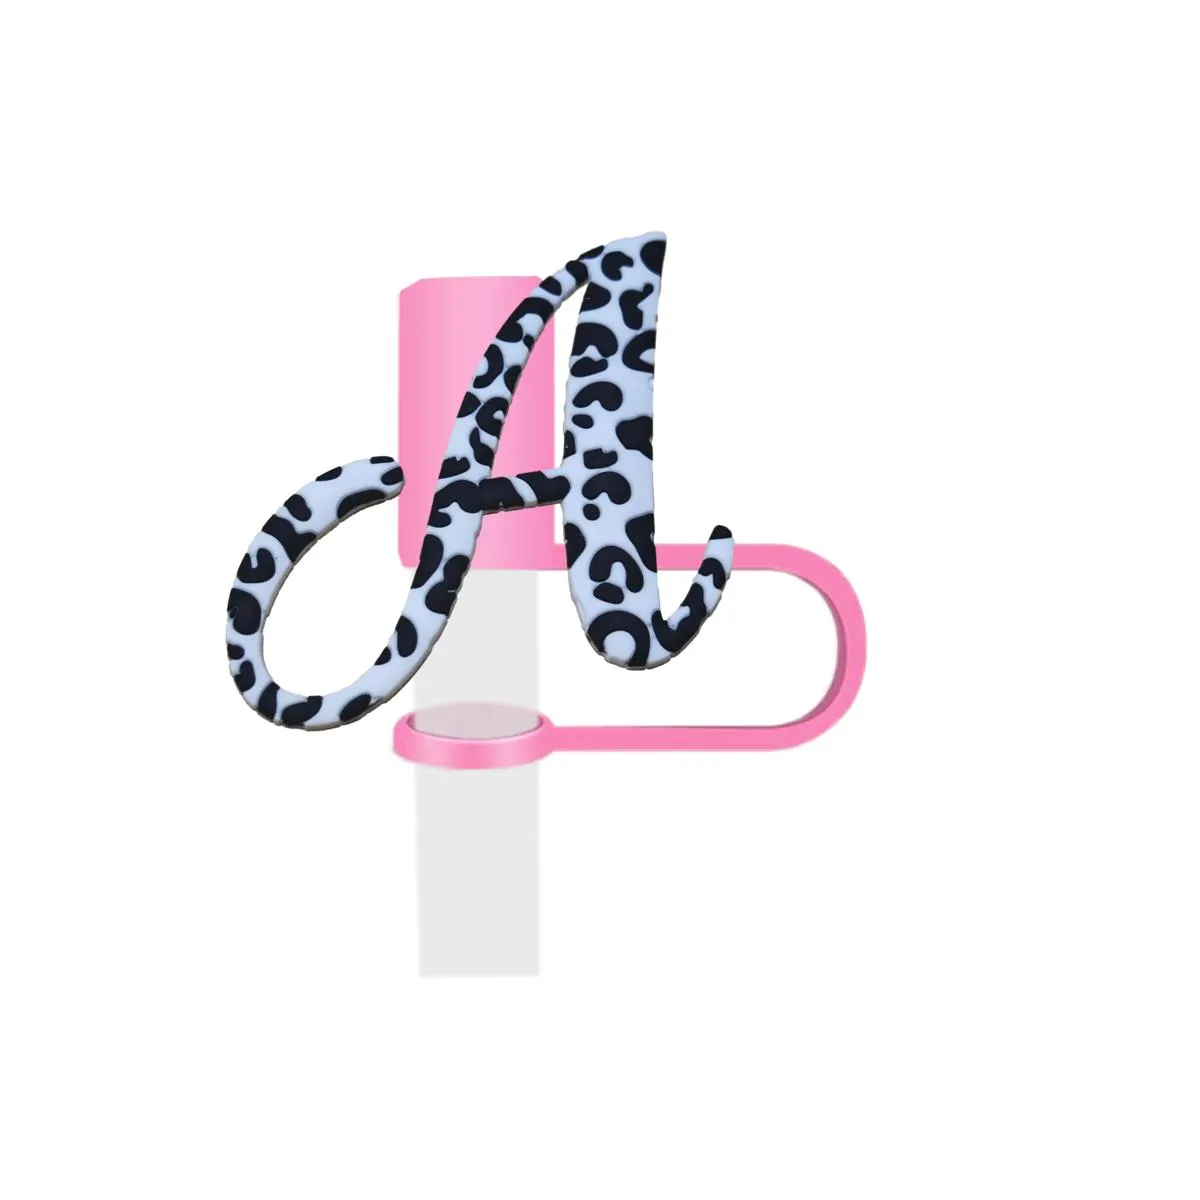 zebra large letters straw cover for  cups dust-proof drinking reusable tips lids silicone stopper topper tumbler accessories cute protectors